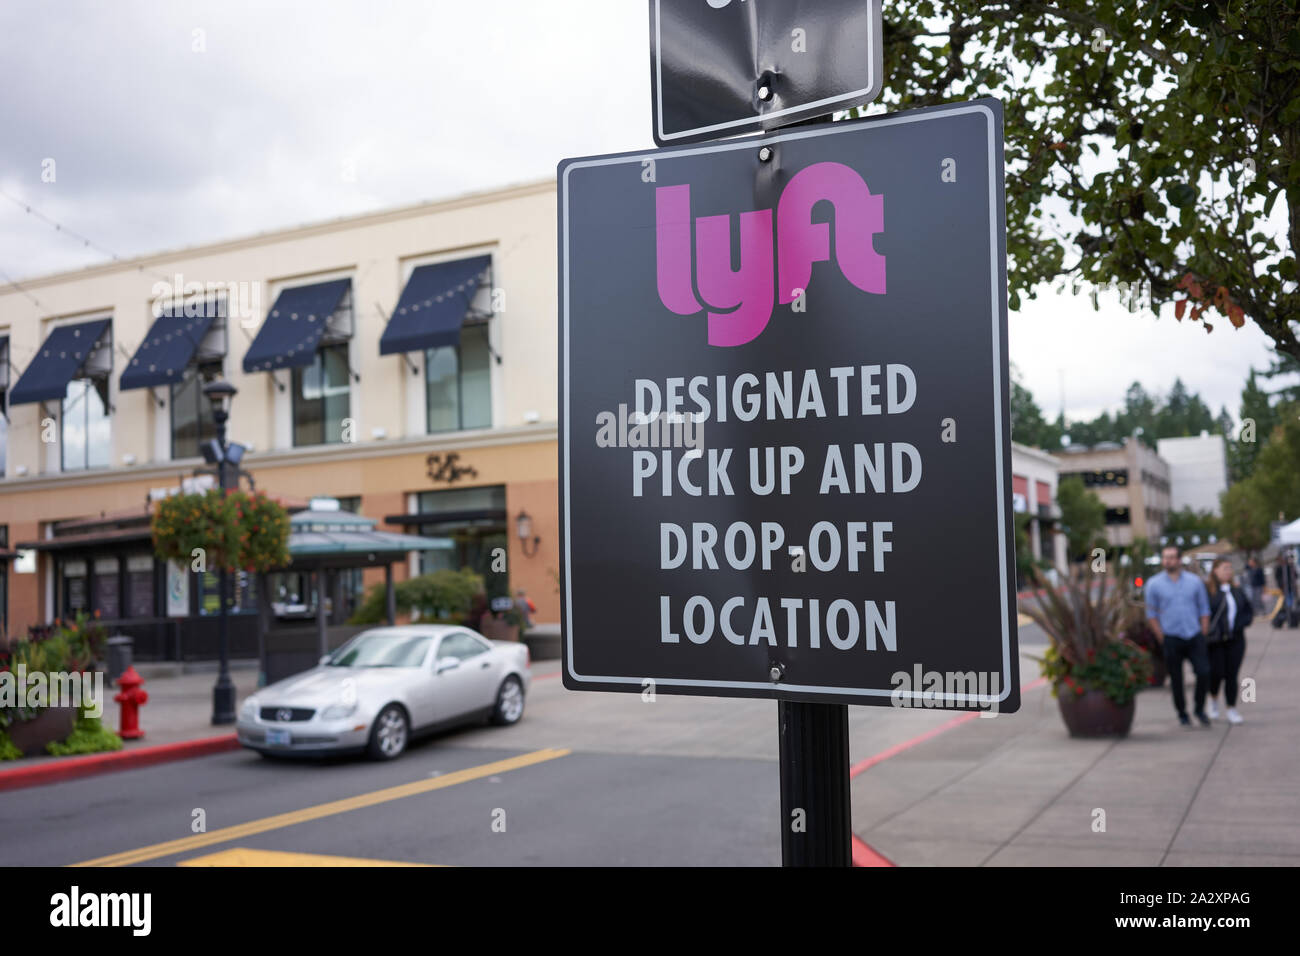 Tigard, Oregon, USA - Sep 28, 2019: A Lyft designated pick up and drop-off location sign is seen at Bridgeport Shopping Center in Tigard, Oregon. Stock Photo